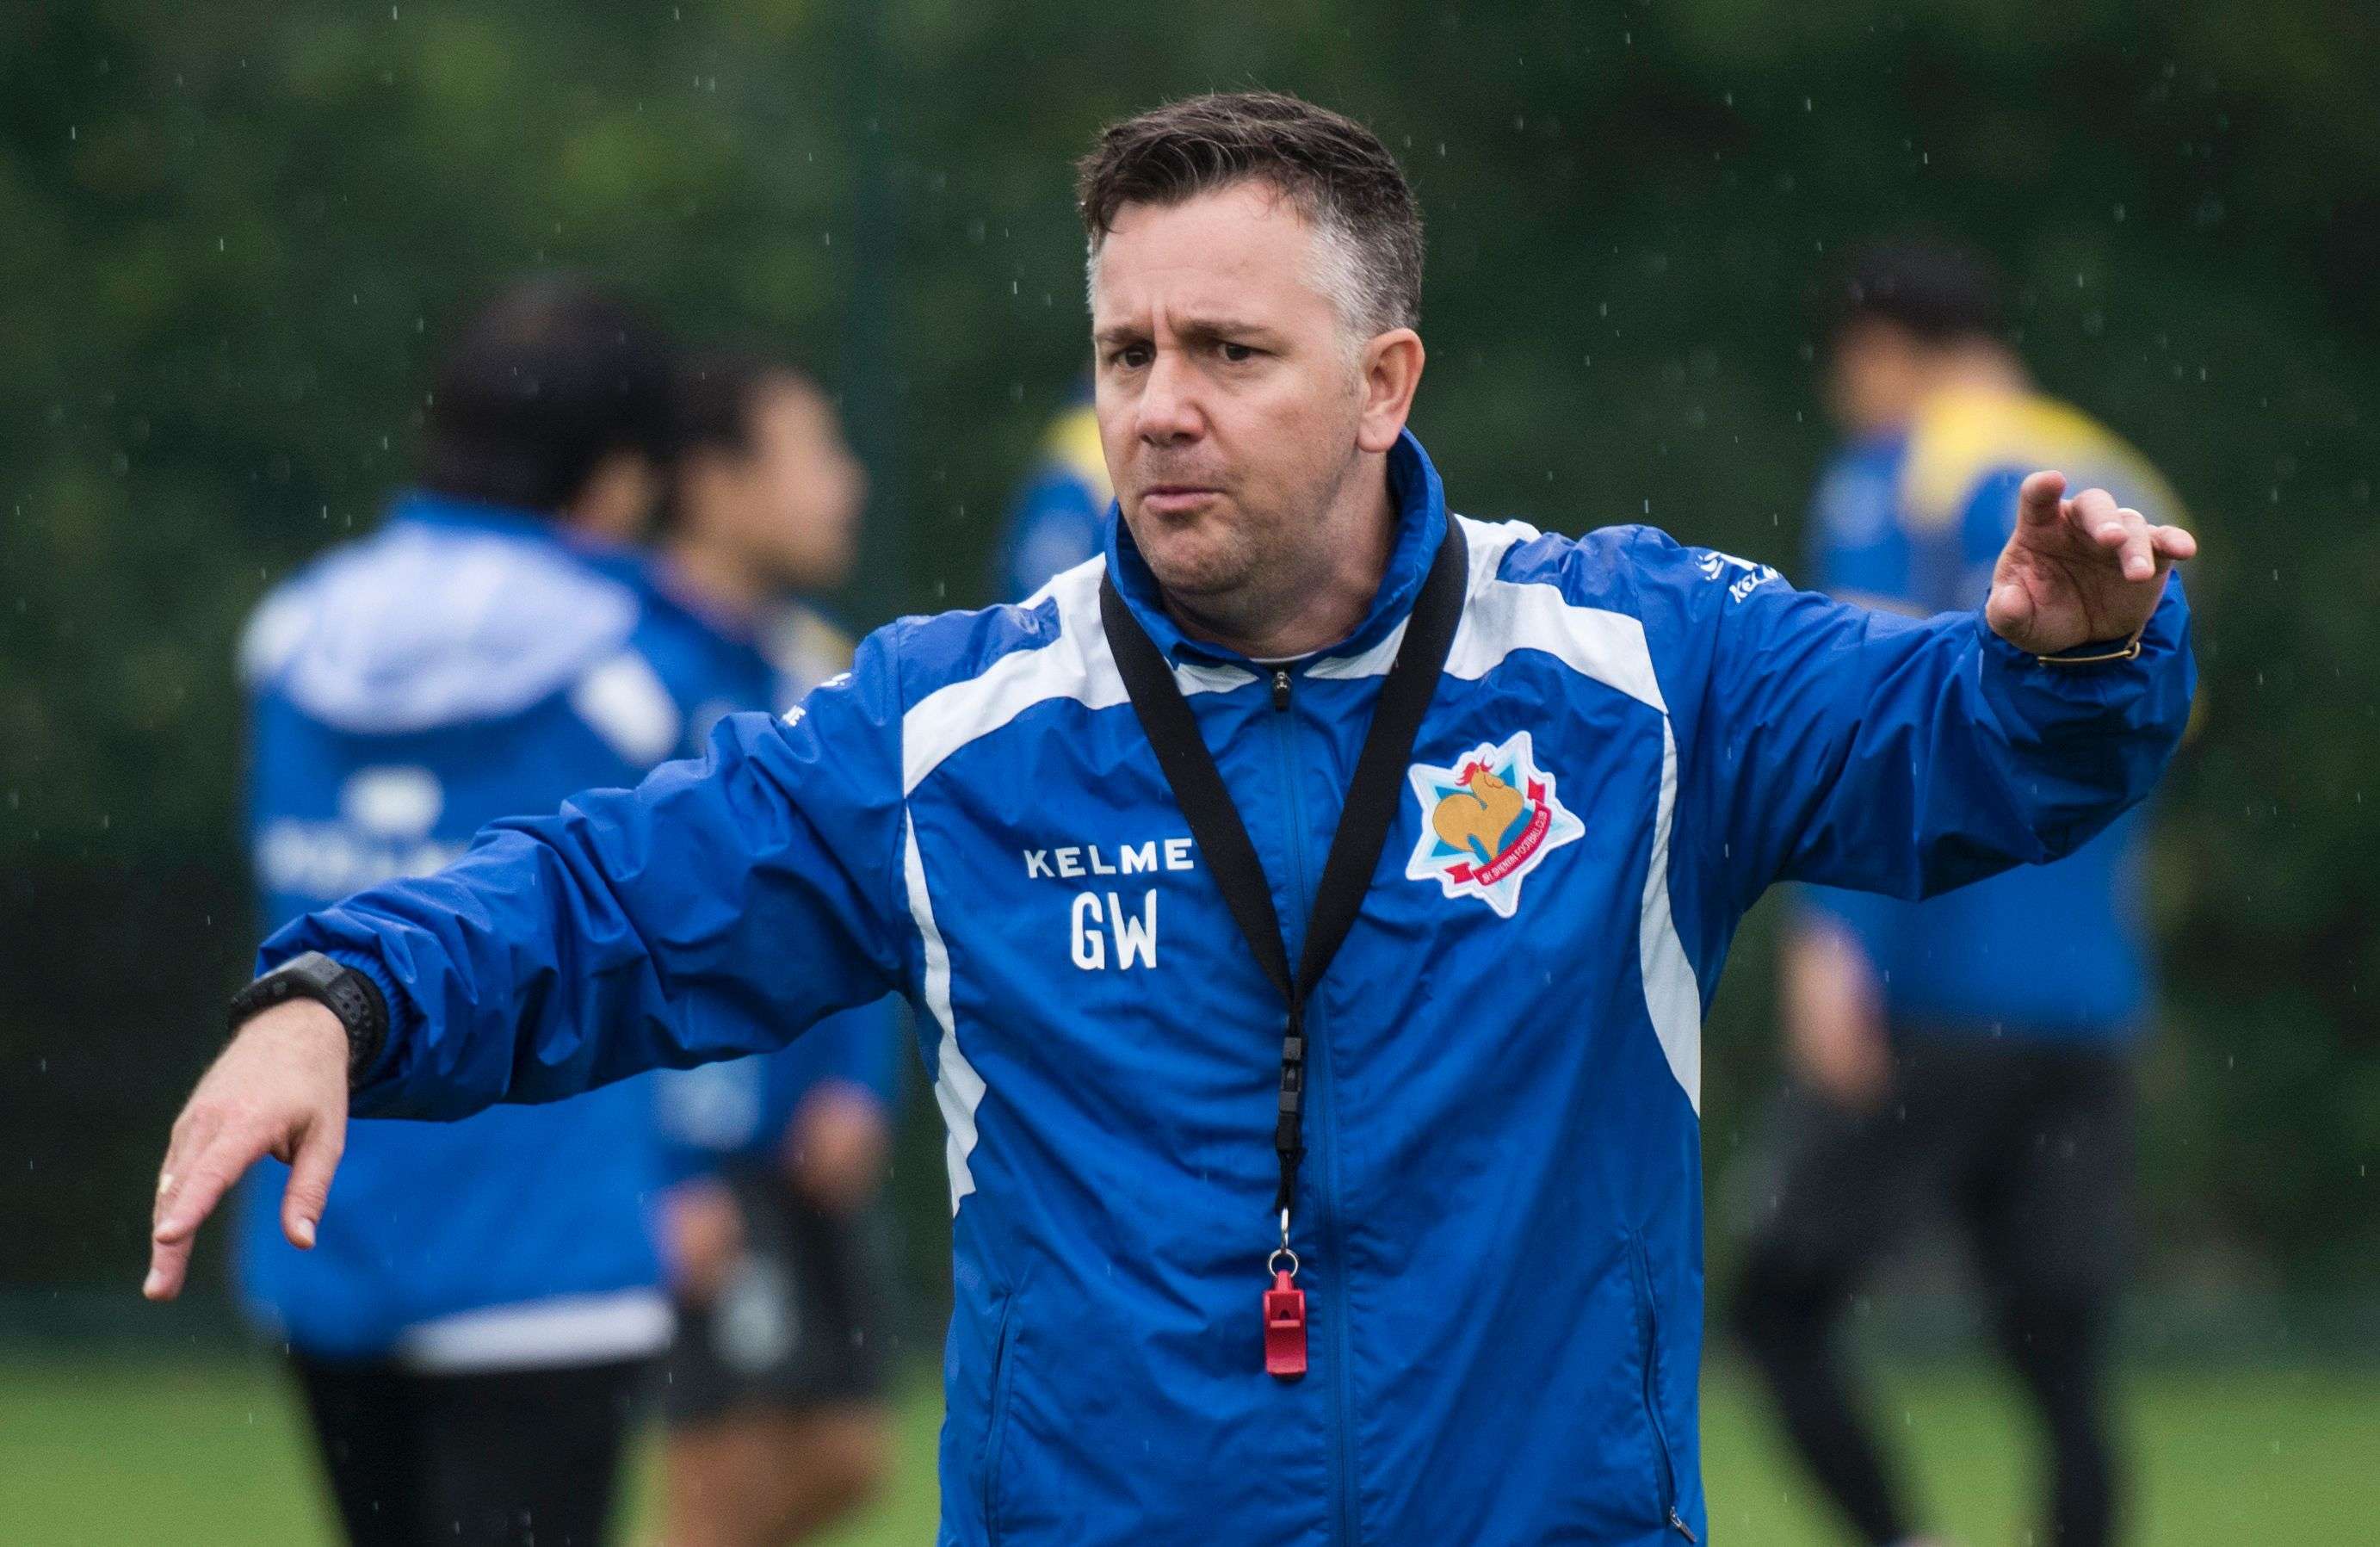 Gary White attending a practice session of the Shanghai Shenxin football club in Shanghai. AFP